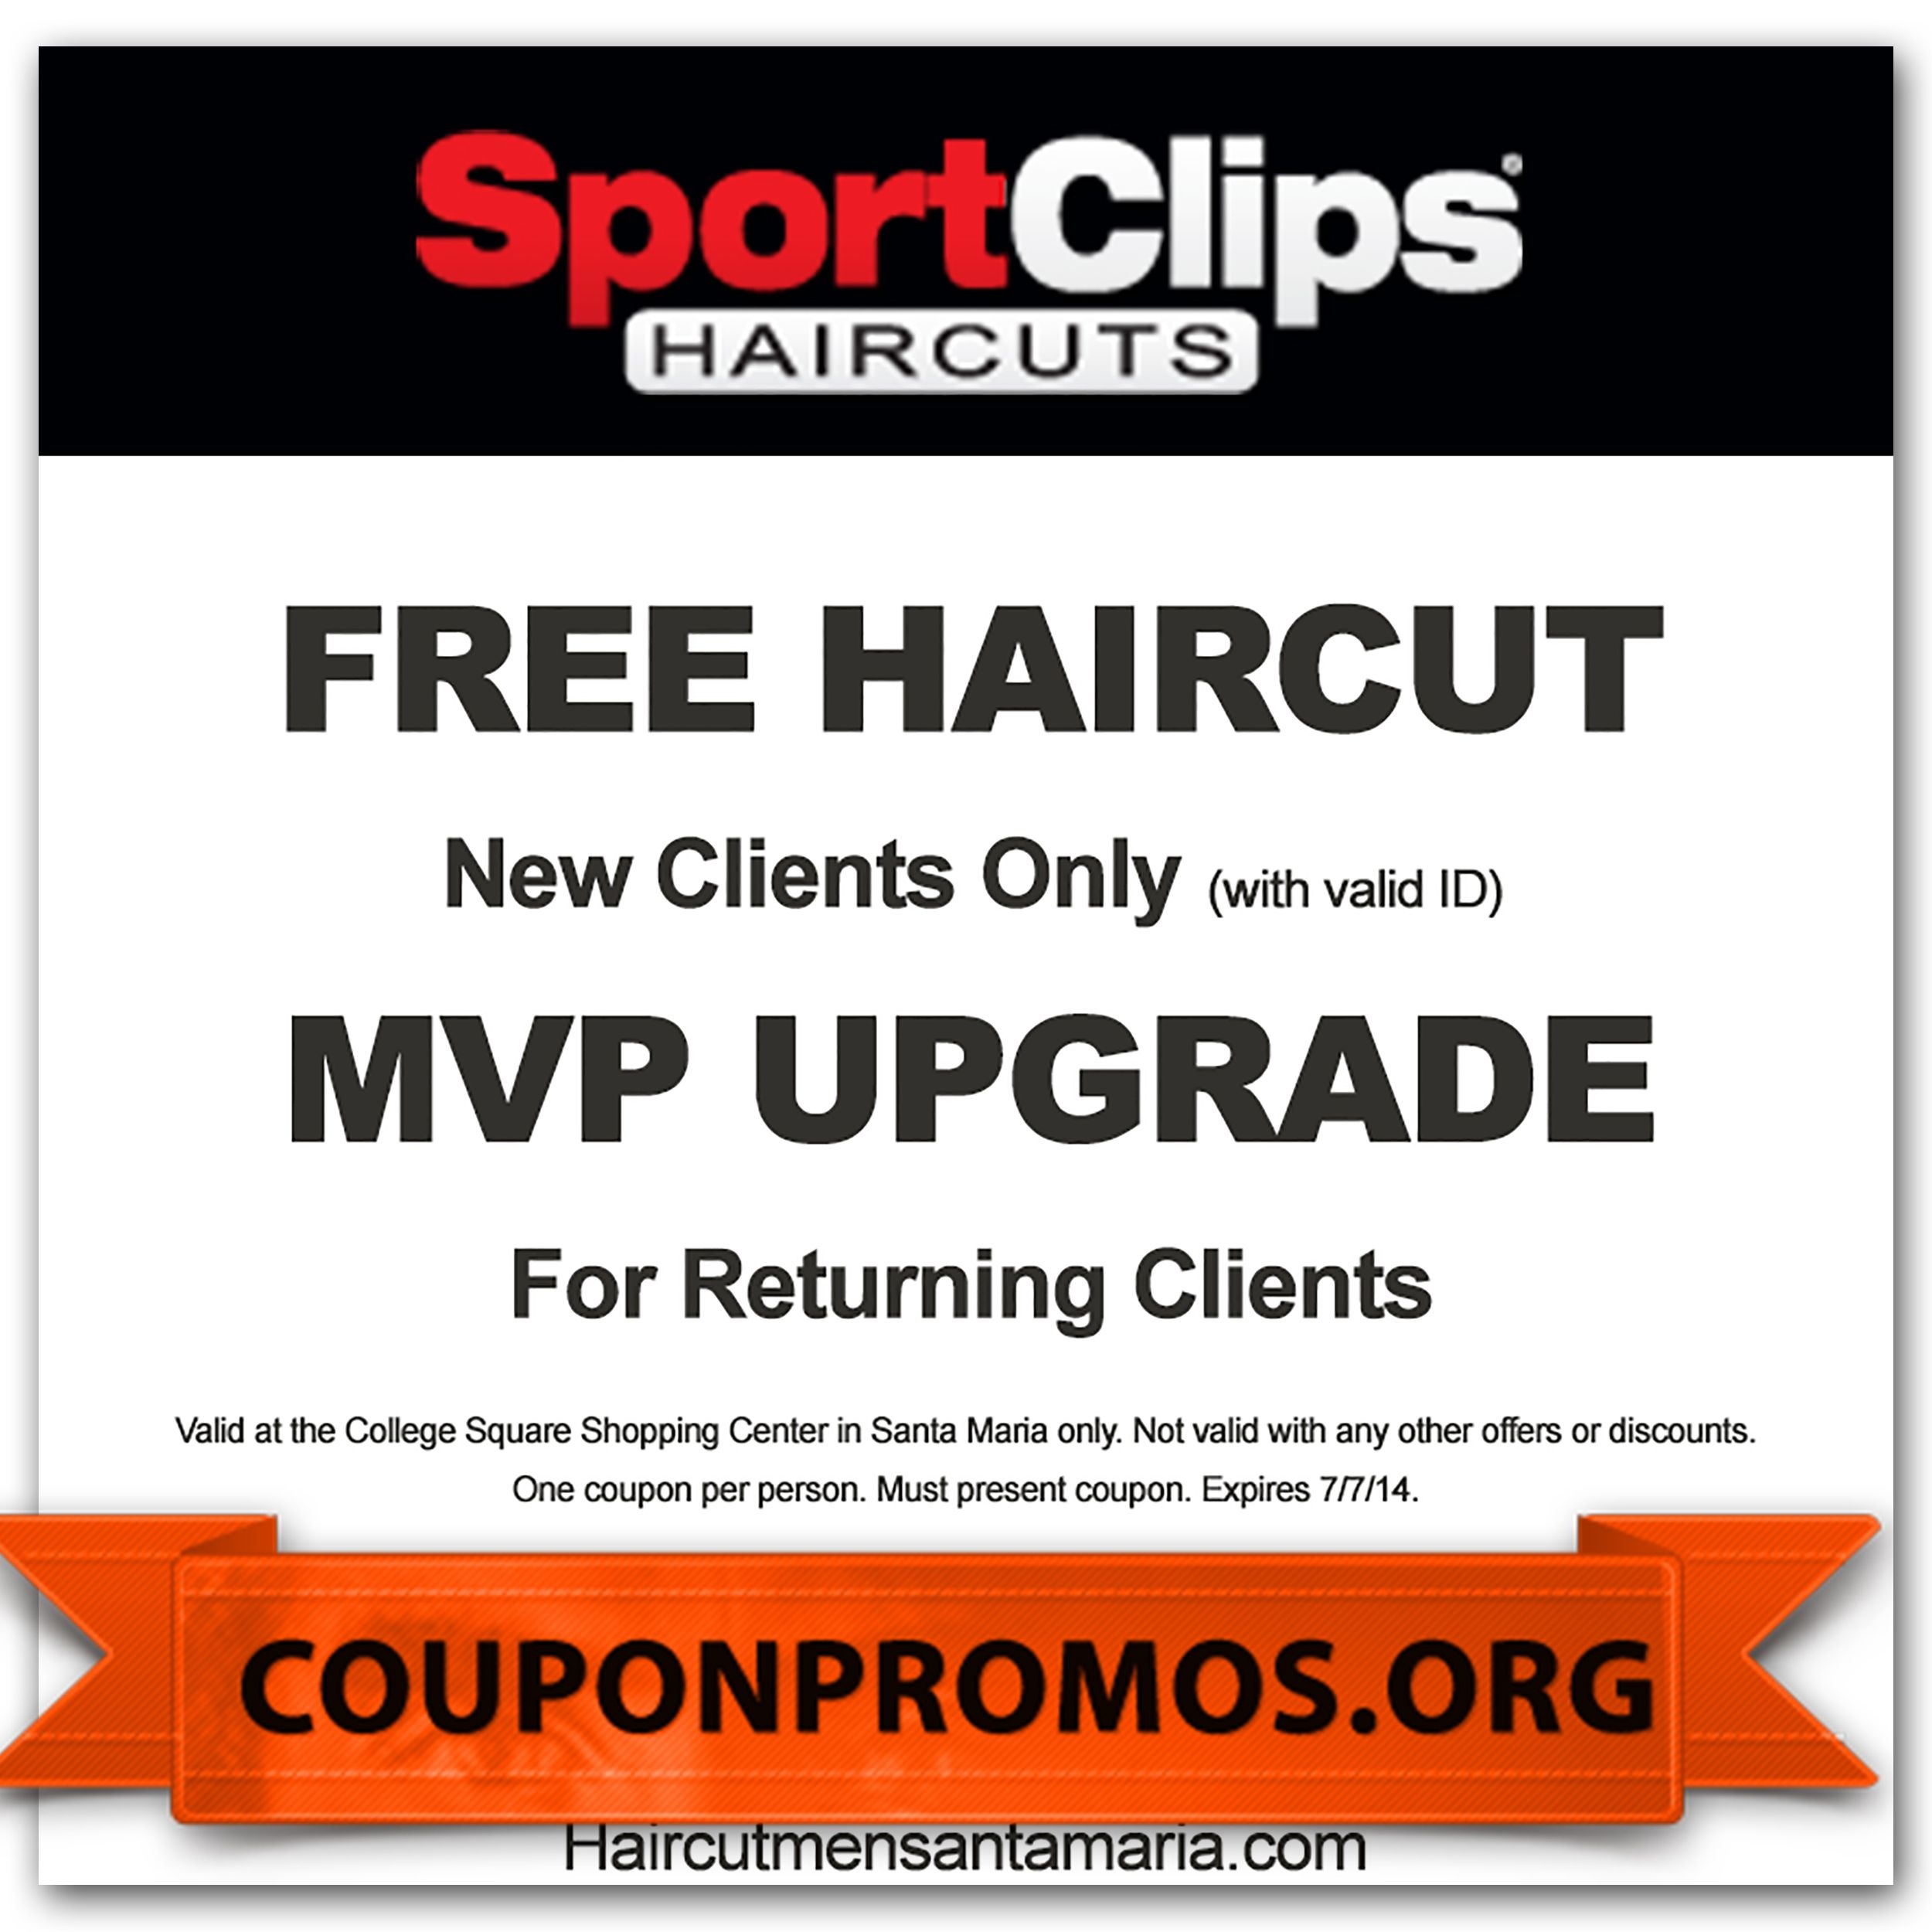 Sports Clips Coupons For November December | Coupons For Free - Sports Clips Free Haircut Printable Coupon